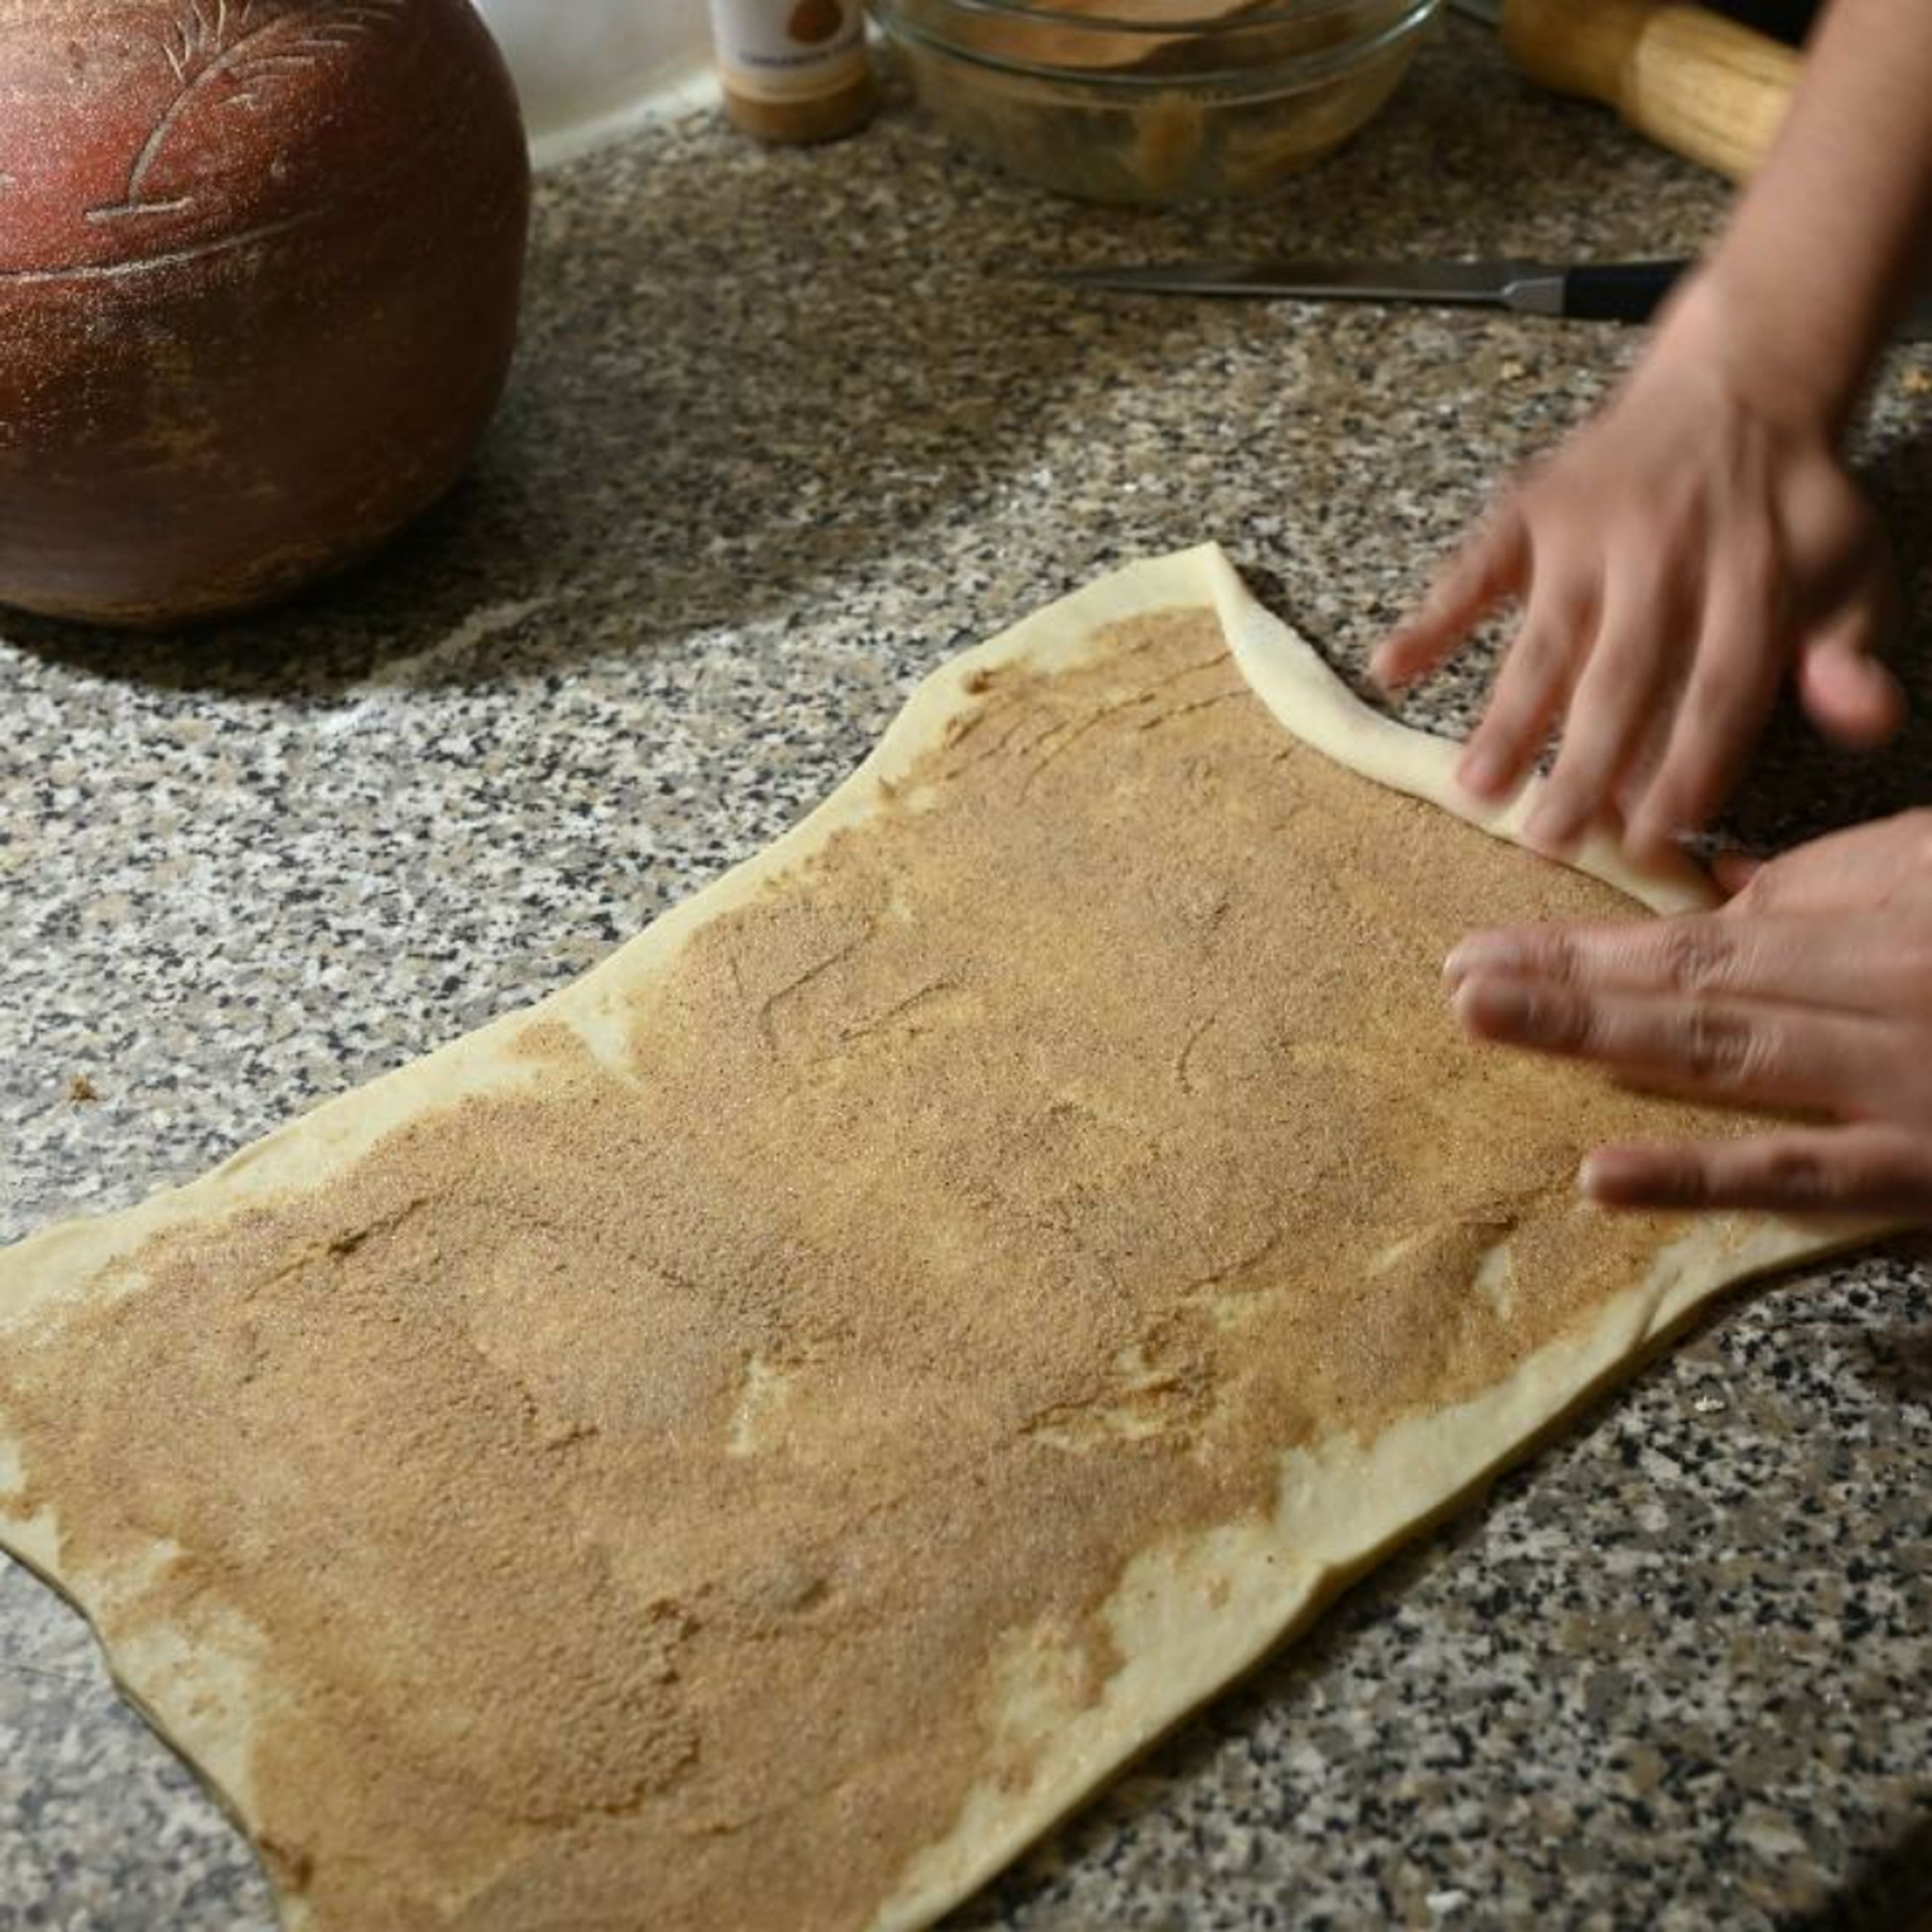 Spread the cinnamon powder and sugar mixture on to the dough. Starting from the short end, roll up the dough into a roll.